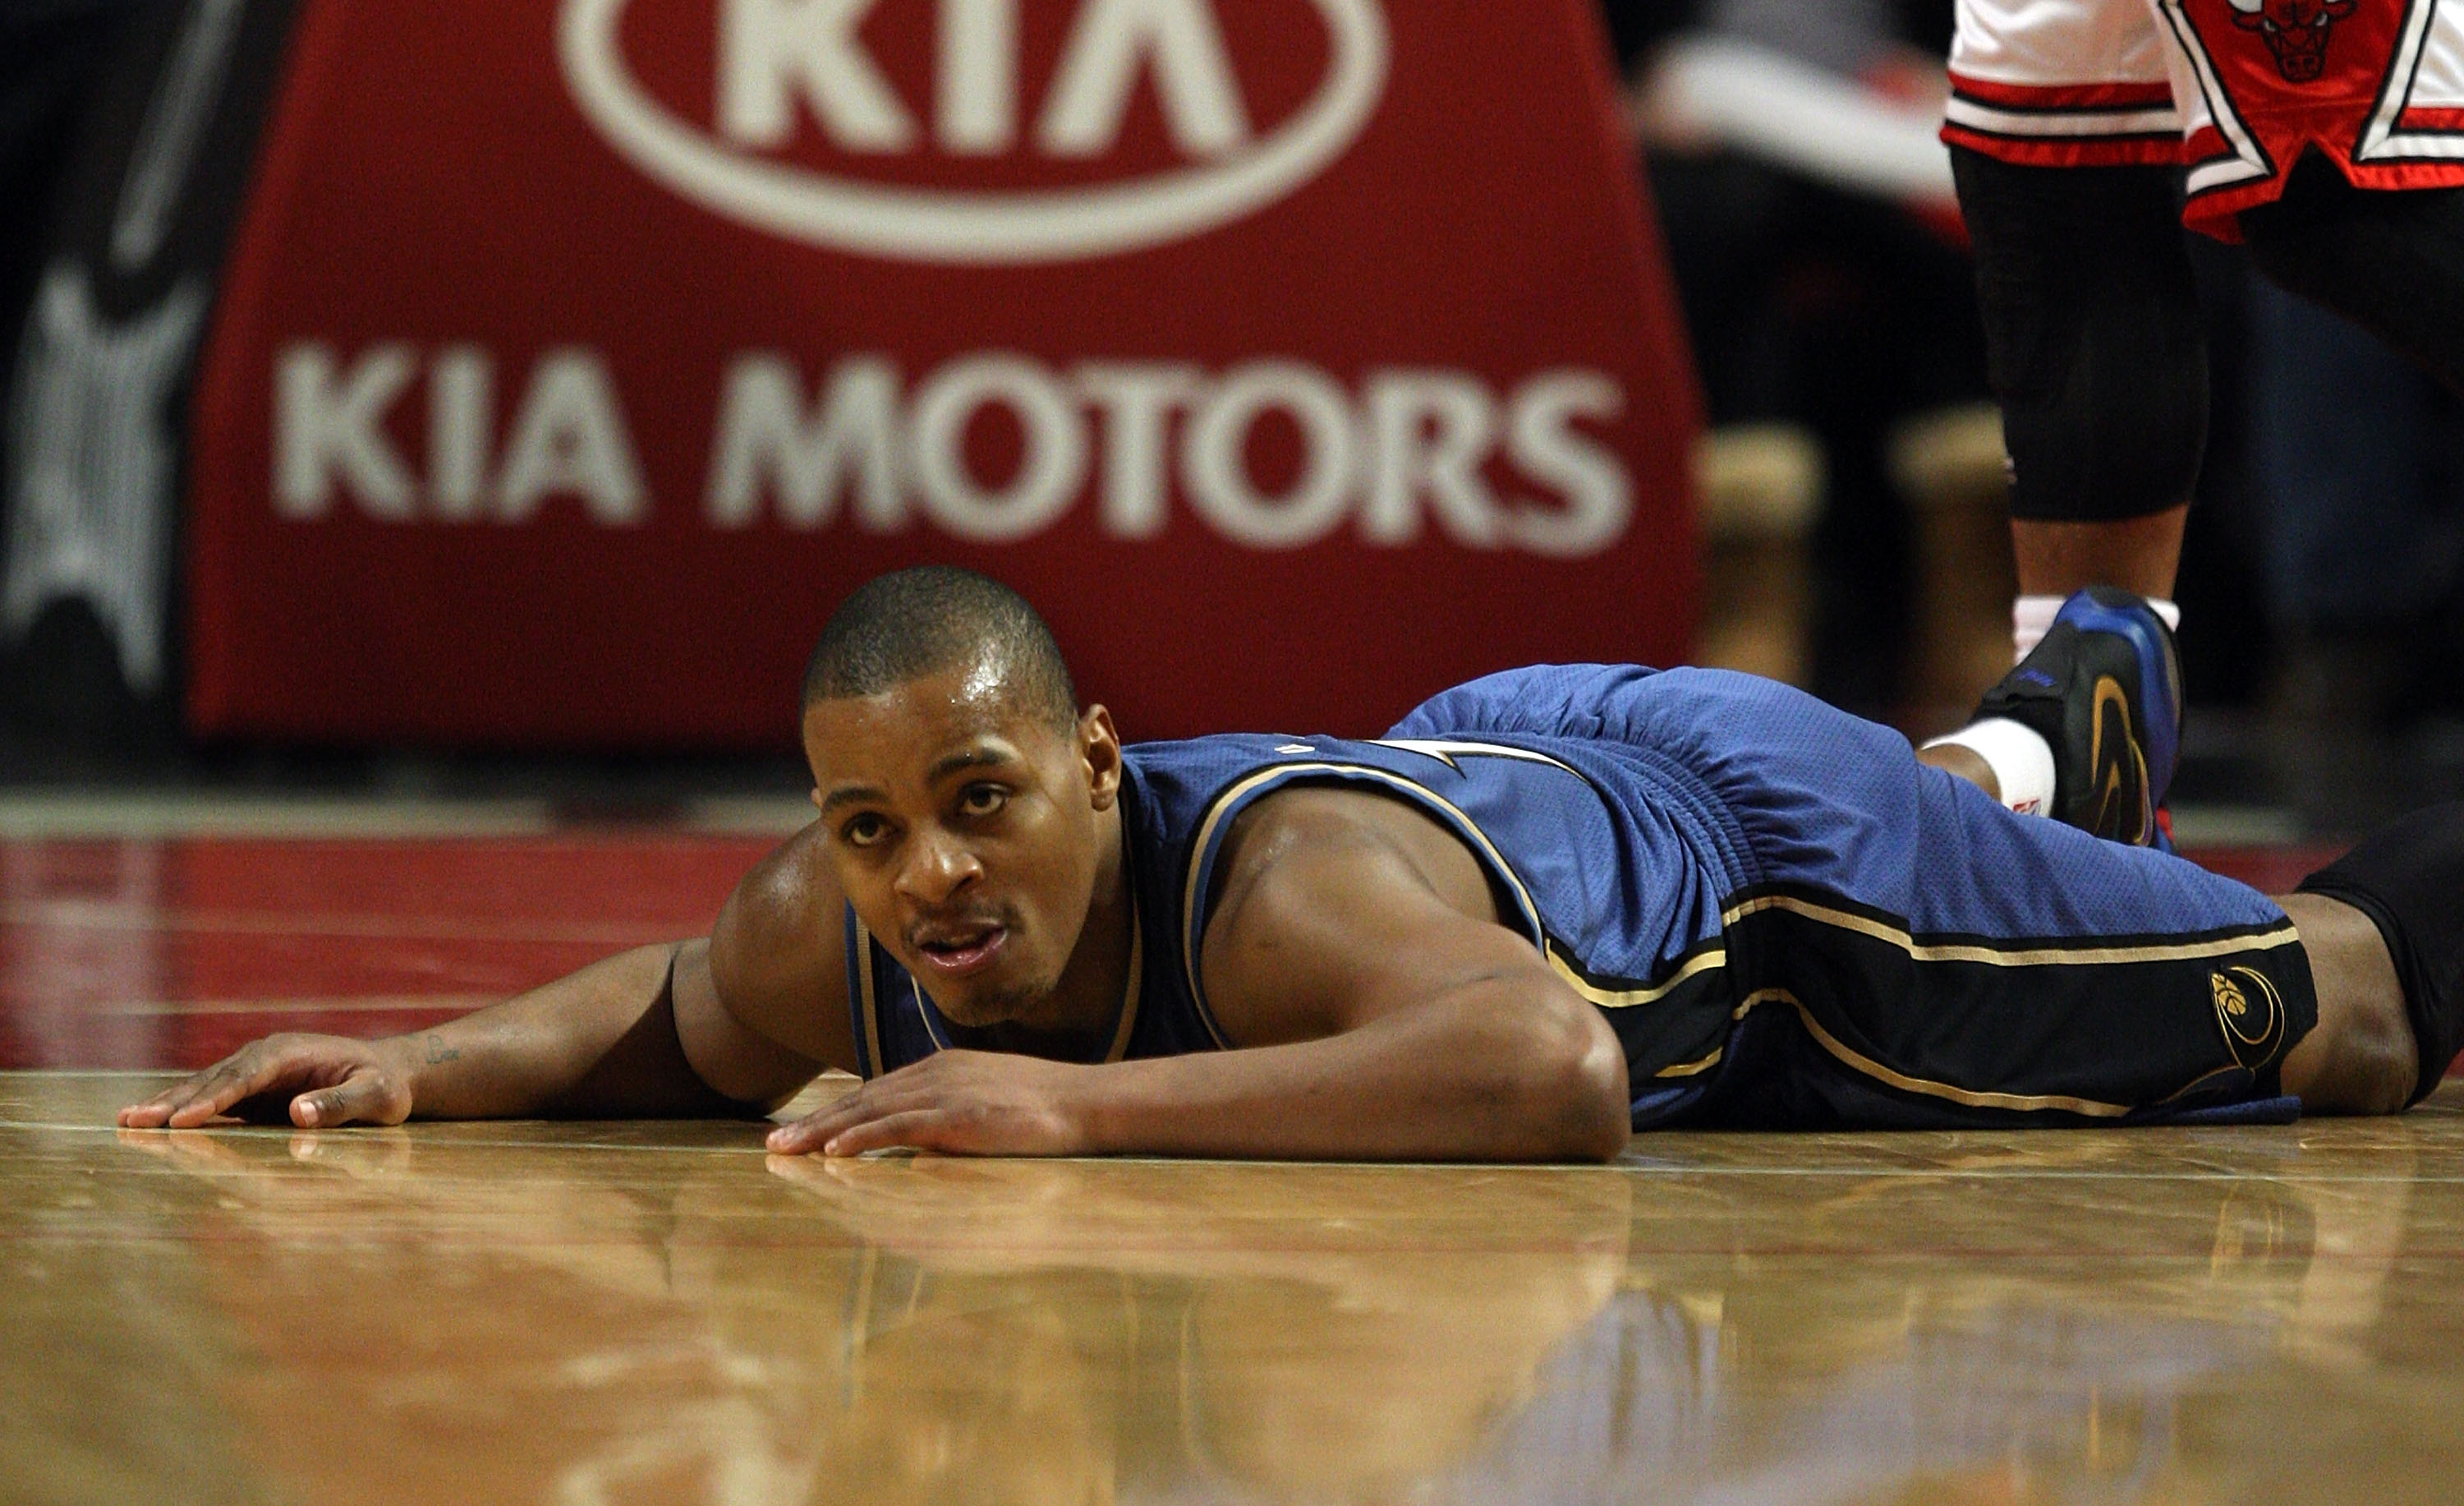 CHICAGO - JANUARY 15: Randy Foye #15 of the Washington Wizards lays on the floor after turning over the ball against the Chicago Bulls at the United Center on January 15, 2010 in Chicago, Illinois. The Bulls defeated the Wizards 121-119 in double overtime